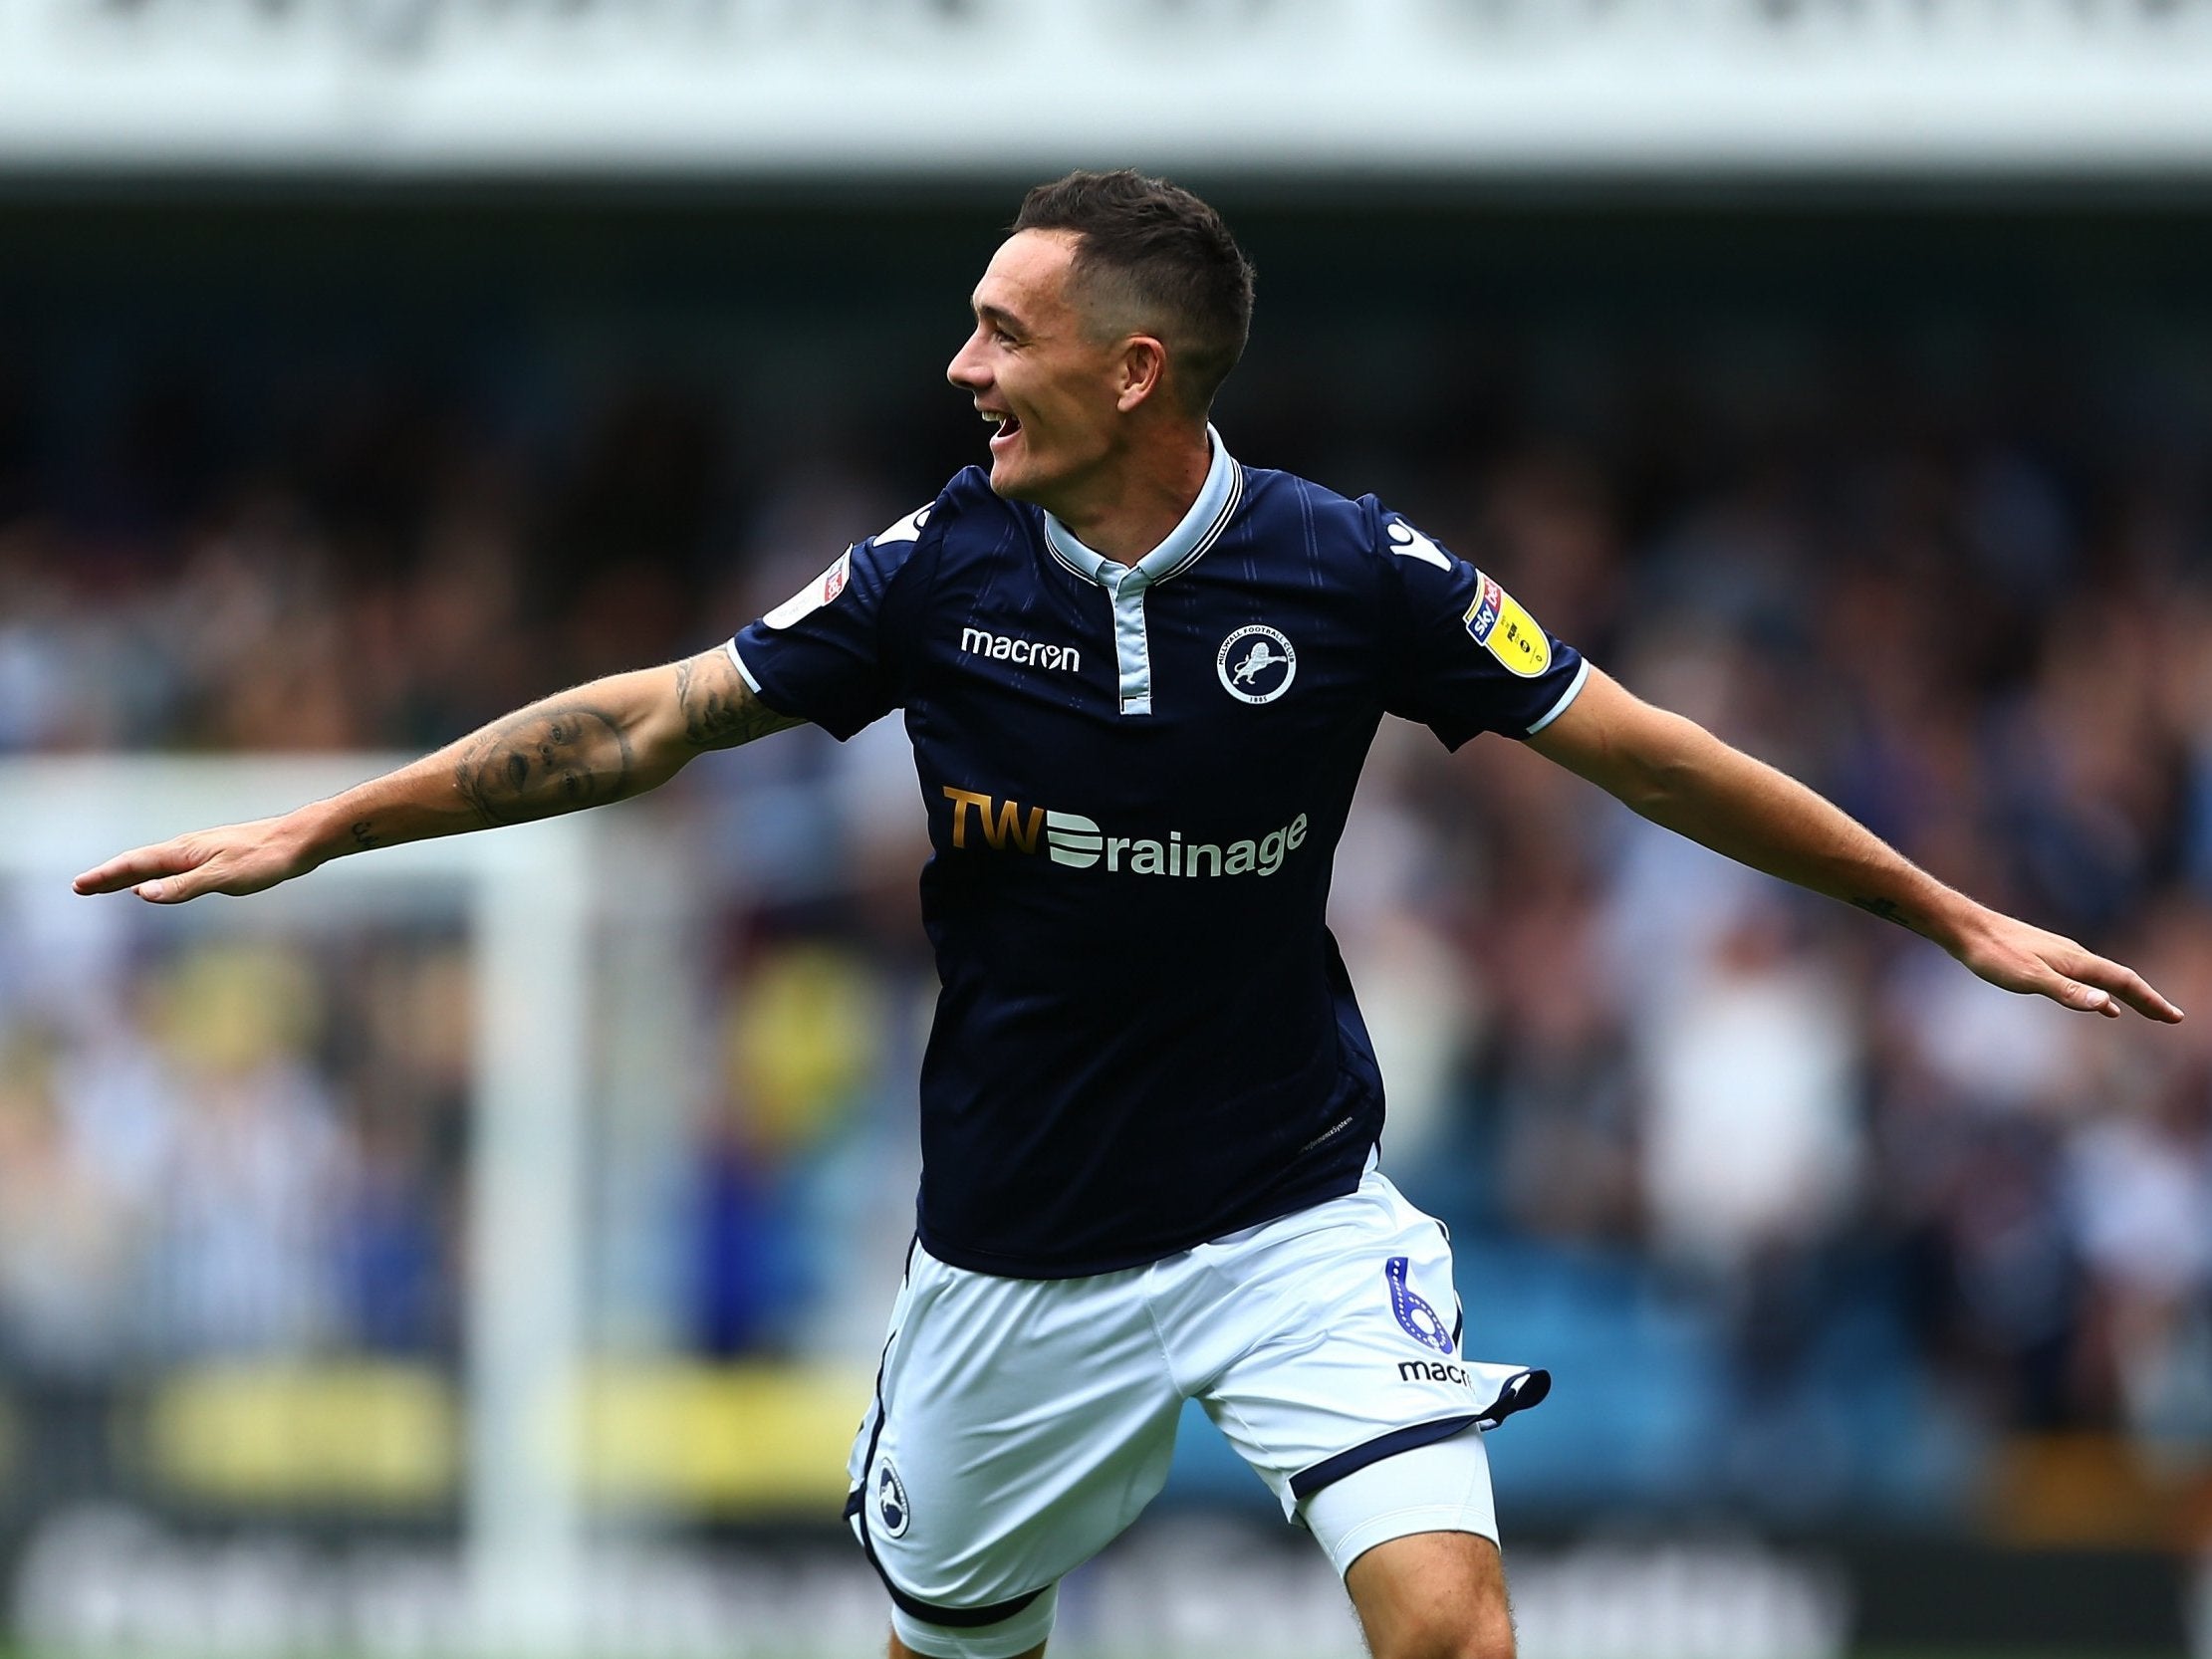 Shaun Williams celebrates after putting Millwall 2-0 up